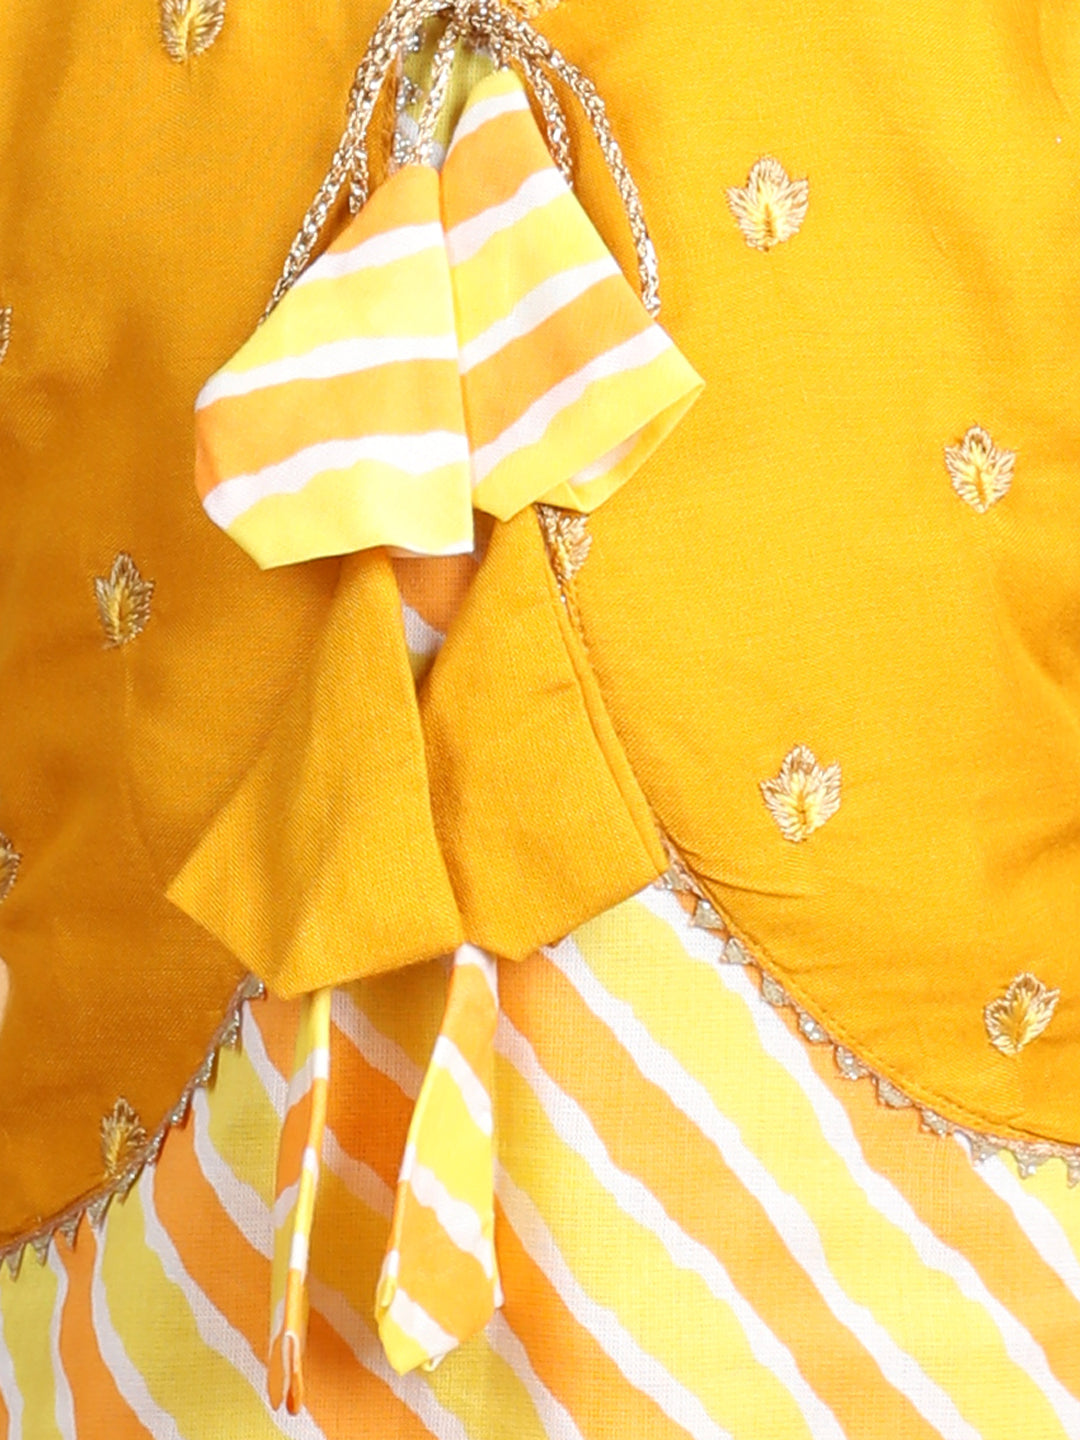 Yellow Lehriya Kurti with attached embroidered jacket paired with pant